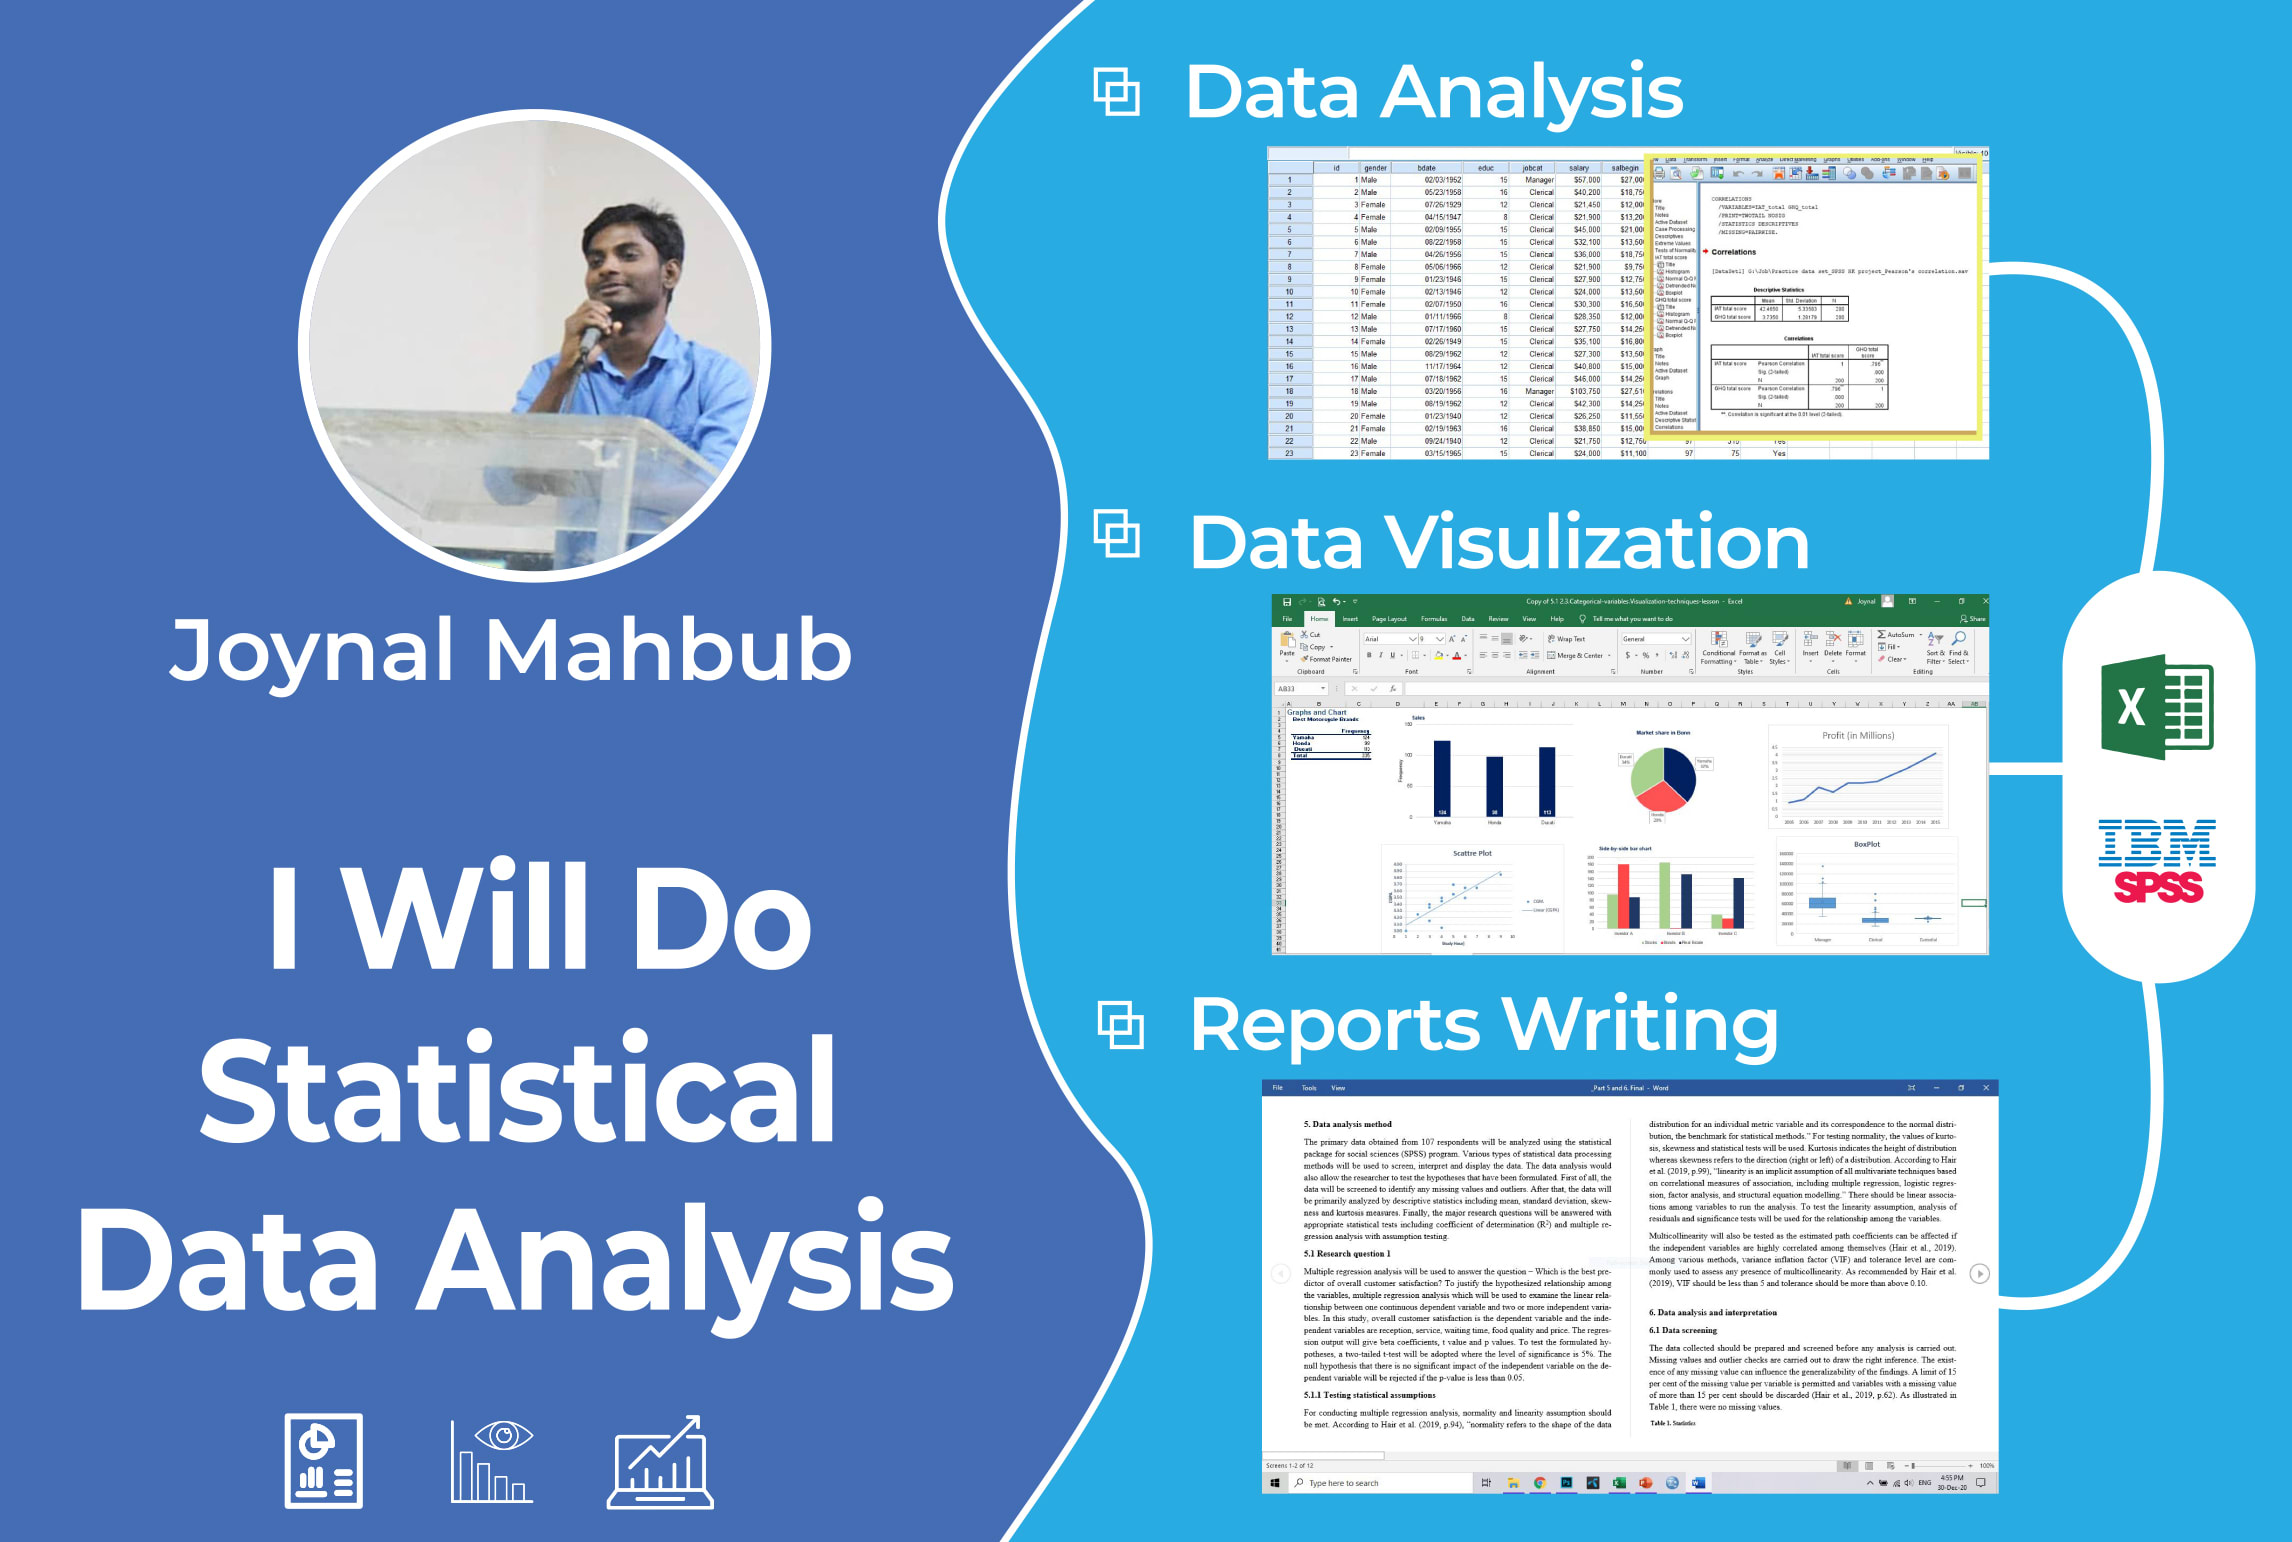 Do Statistical Data Analysis And Visualization In Spss Excel Minitab By Designermahbub7 Fiverr